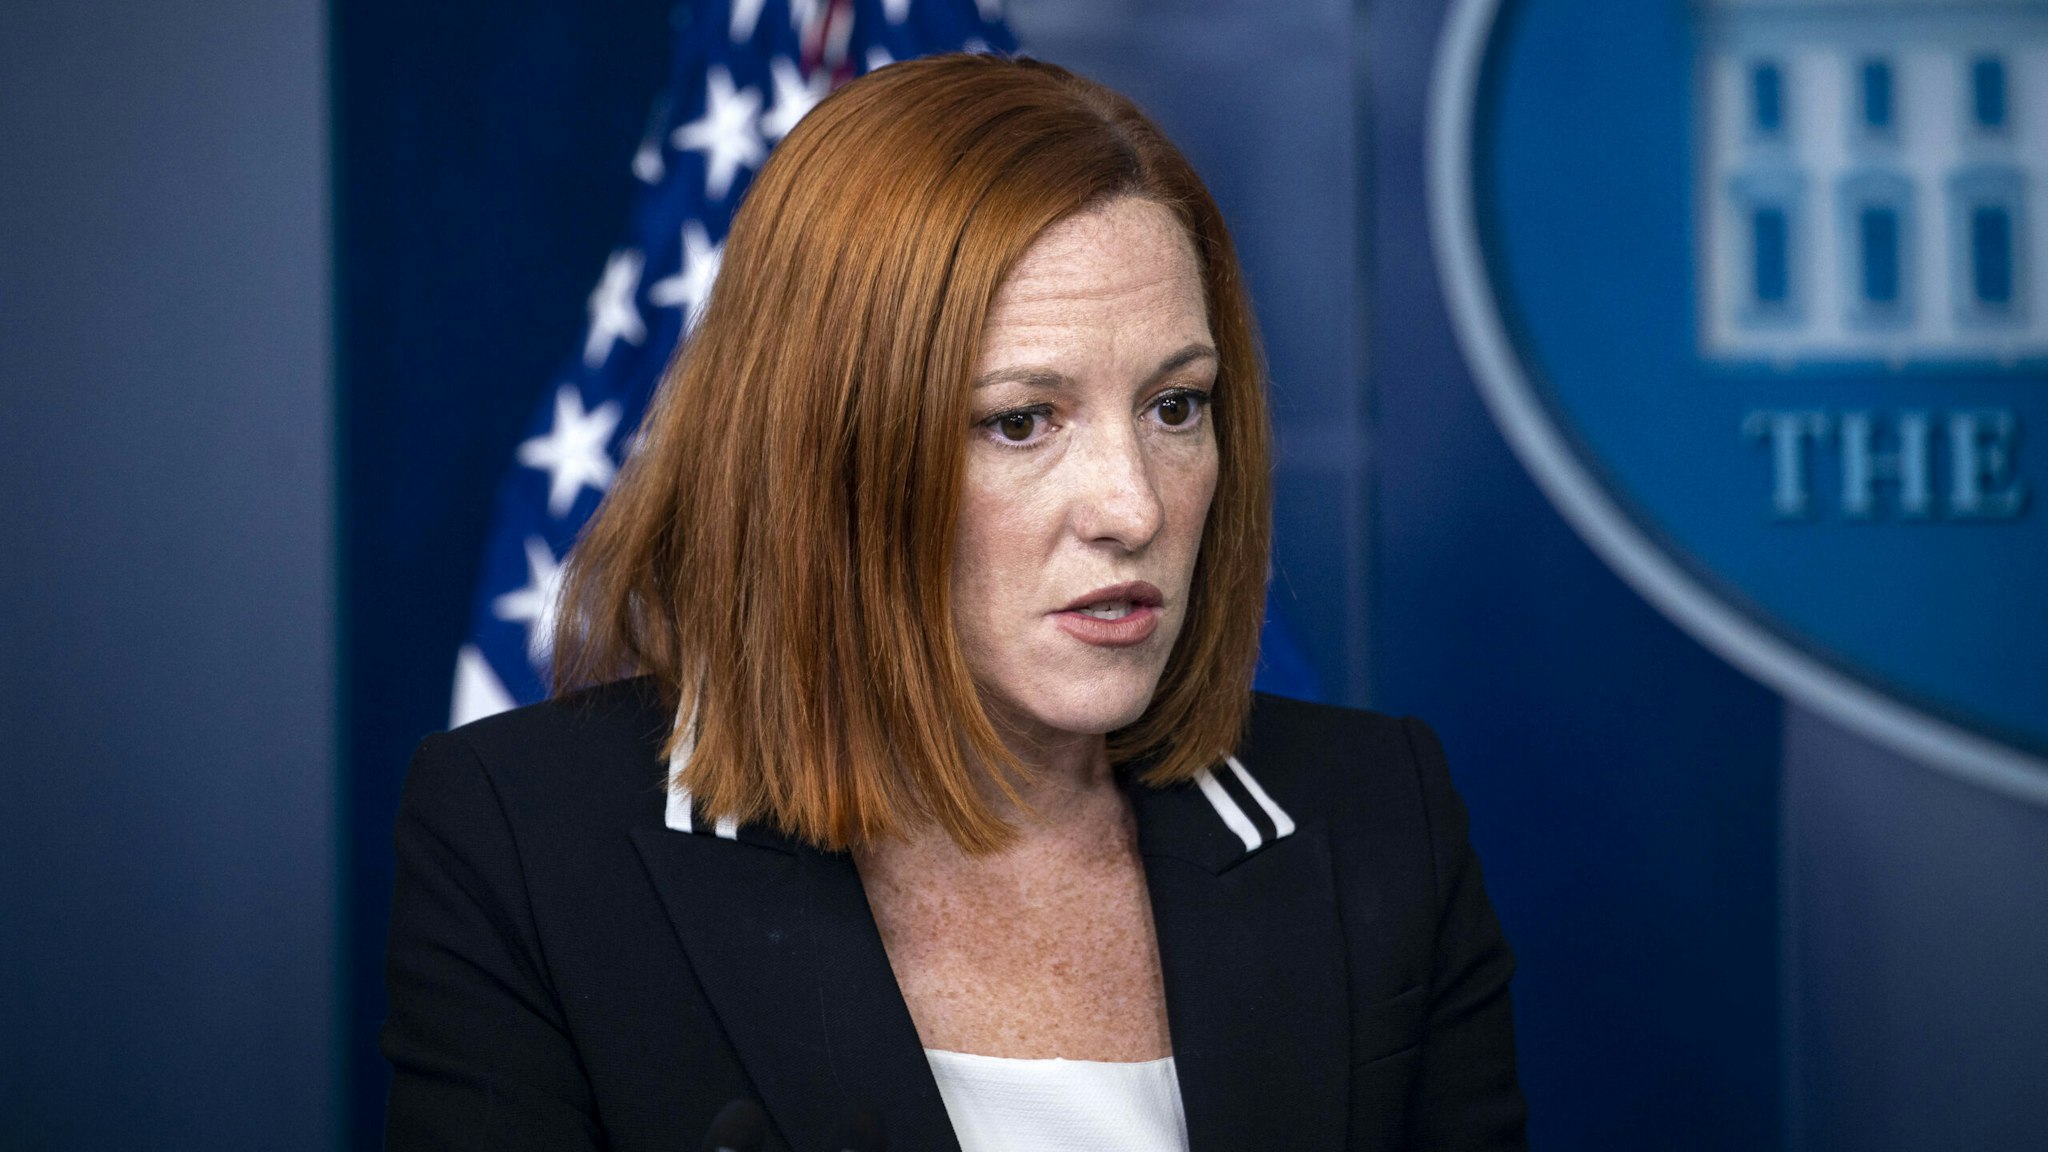 Jen Psaki, White House press secretary, speaks during a news conference in the James S. Brady Press Briefing Room at the White House in Washington, D.C., U.S., on Thursday, Sept. 2, 2021. President Biden last month urged a group of chief executive officers to help improve cybersecurity across the nation's critical infrastructure and economy, citing a lack of trained professionals to adequately protect the U.S.